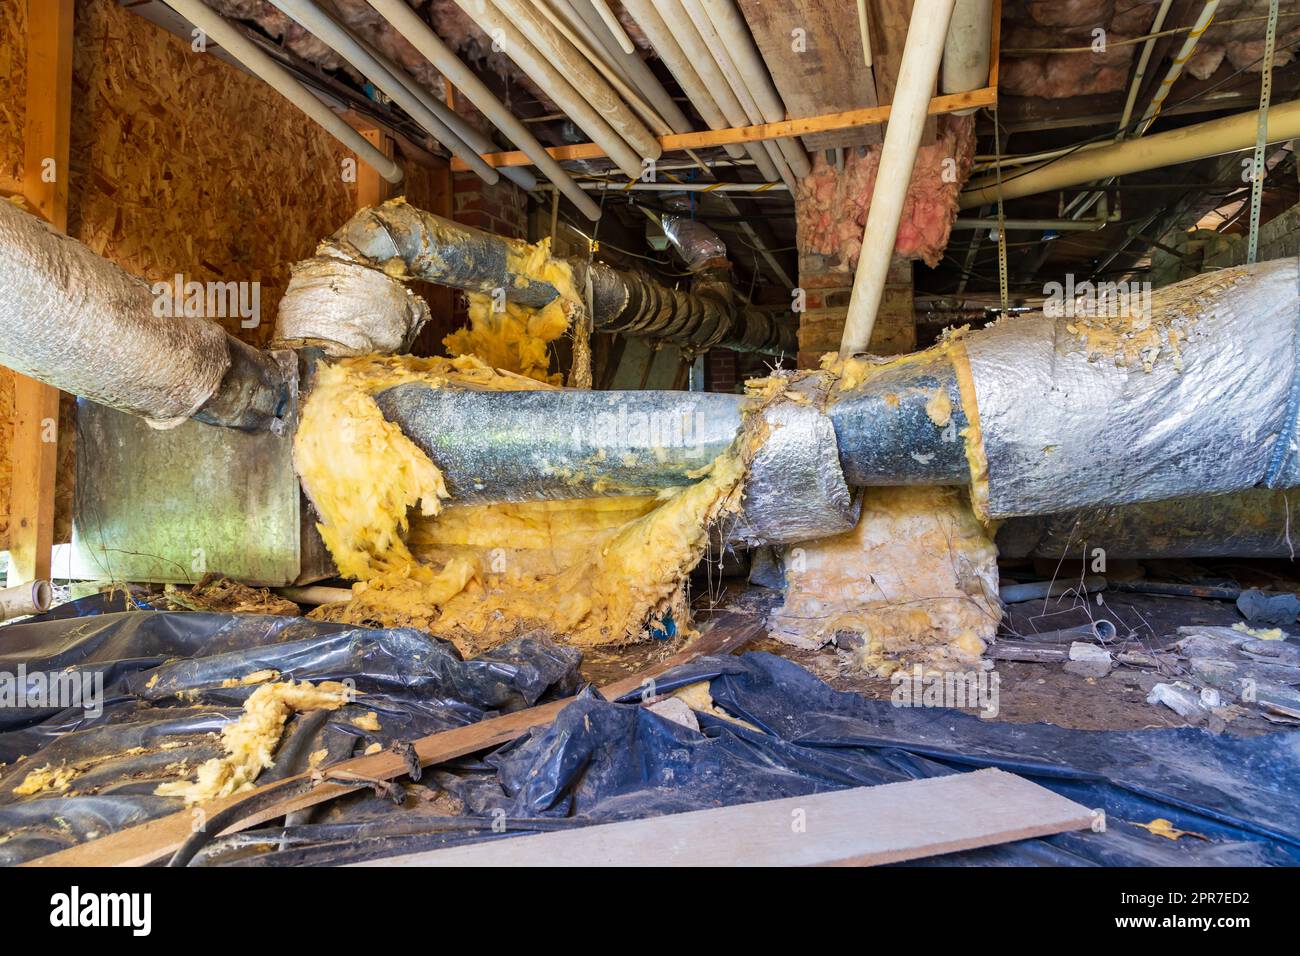 Air Conditioner supply duct work in need of repair and replacement. Stock Photo